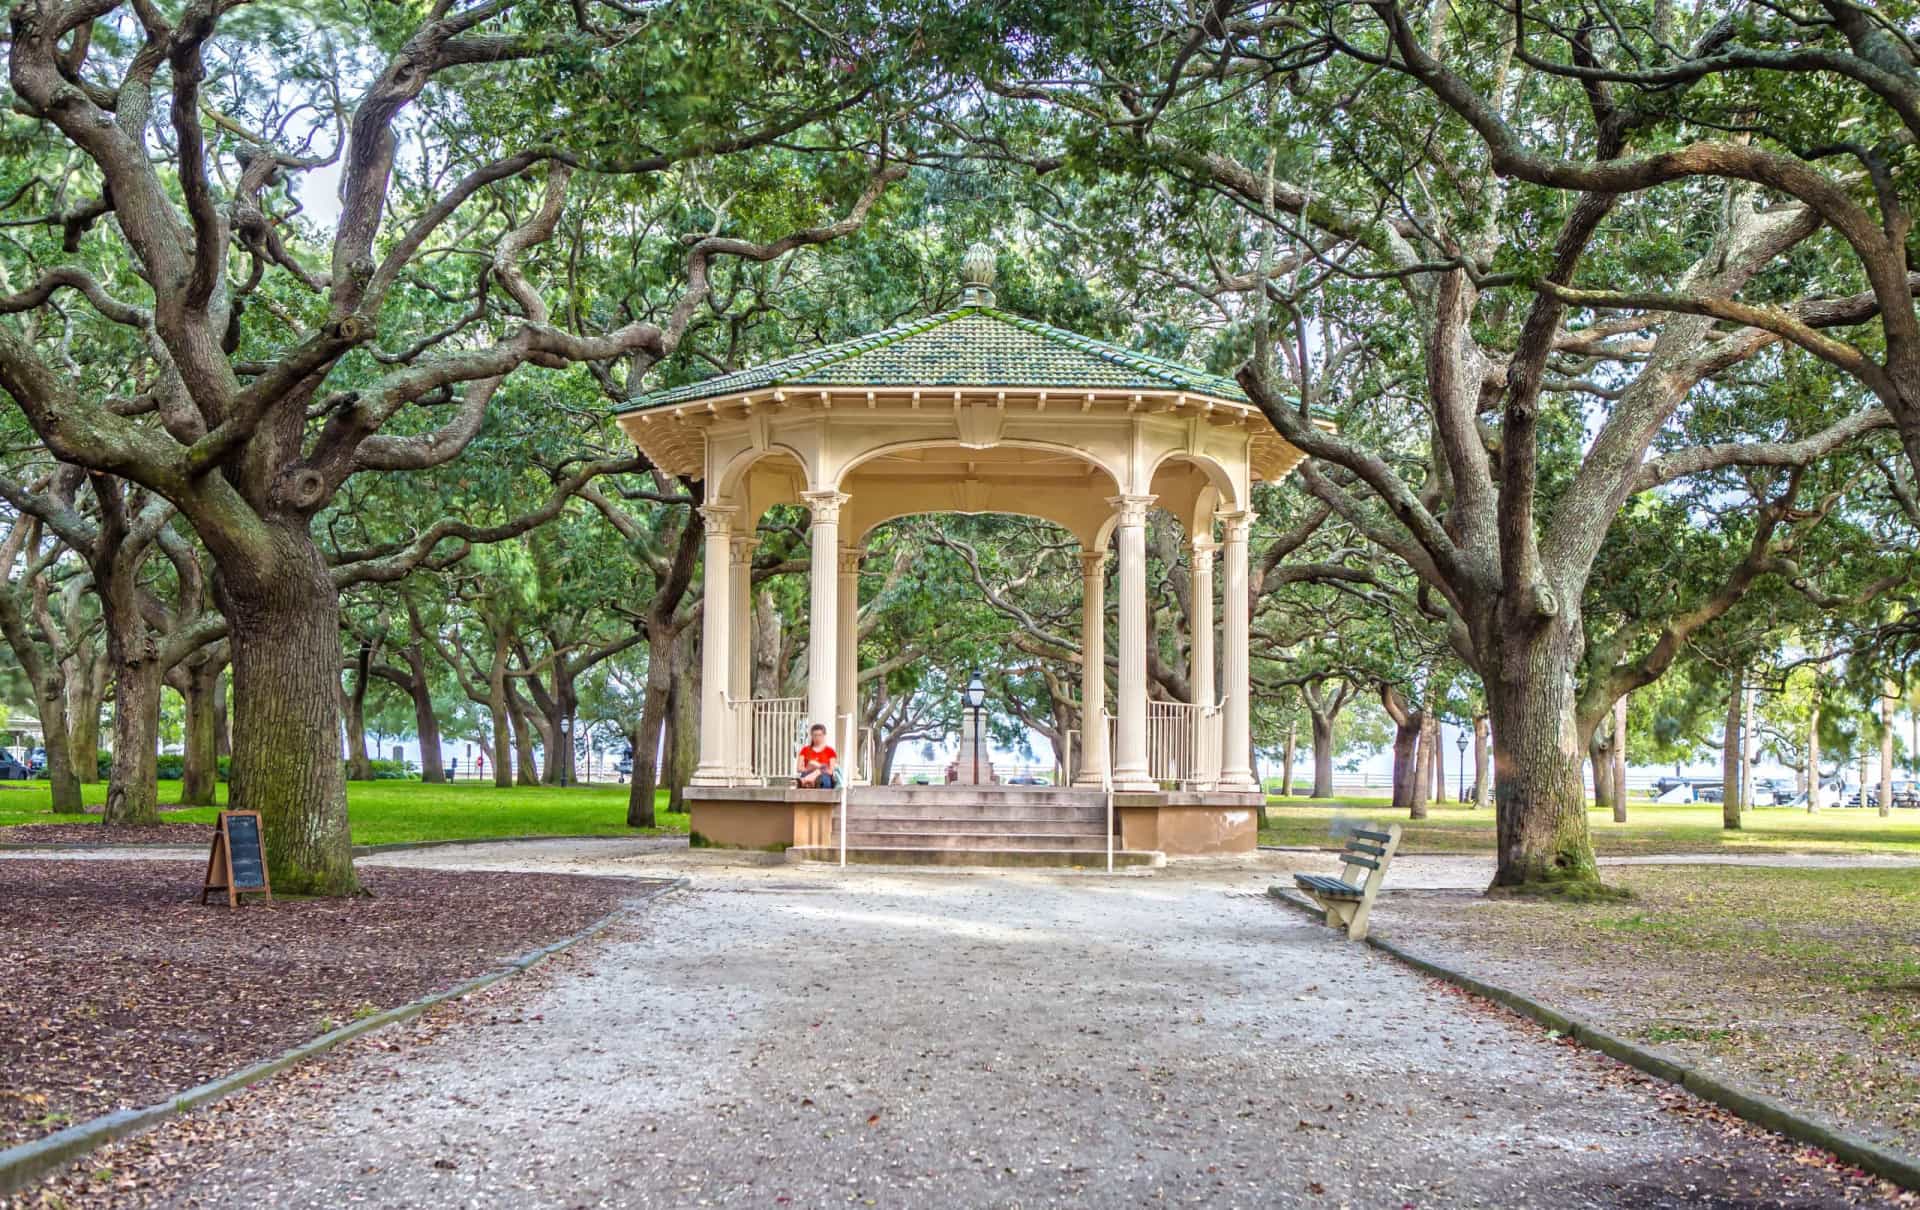 <p>Battery Park and White Point Garden in Charleston are nice enough places, except the area is also haunted by numerous pirates who were hanged there. Screams and apparitions of bodies swinging from the trees are still reported to this day. </p>